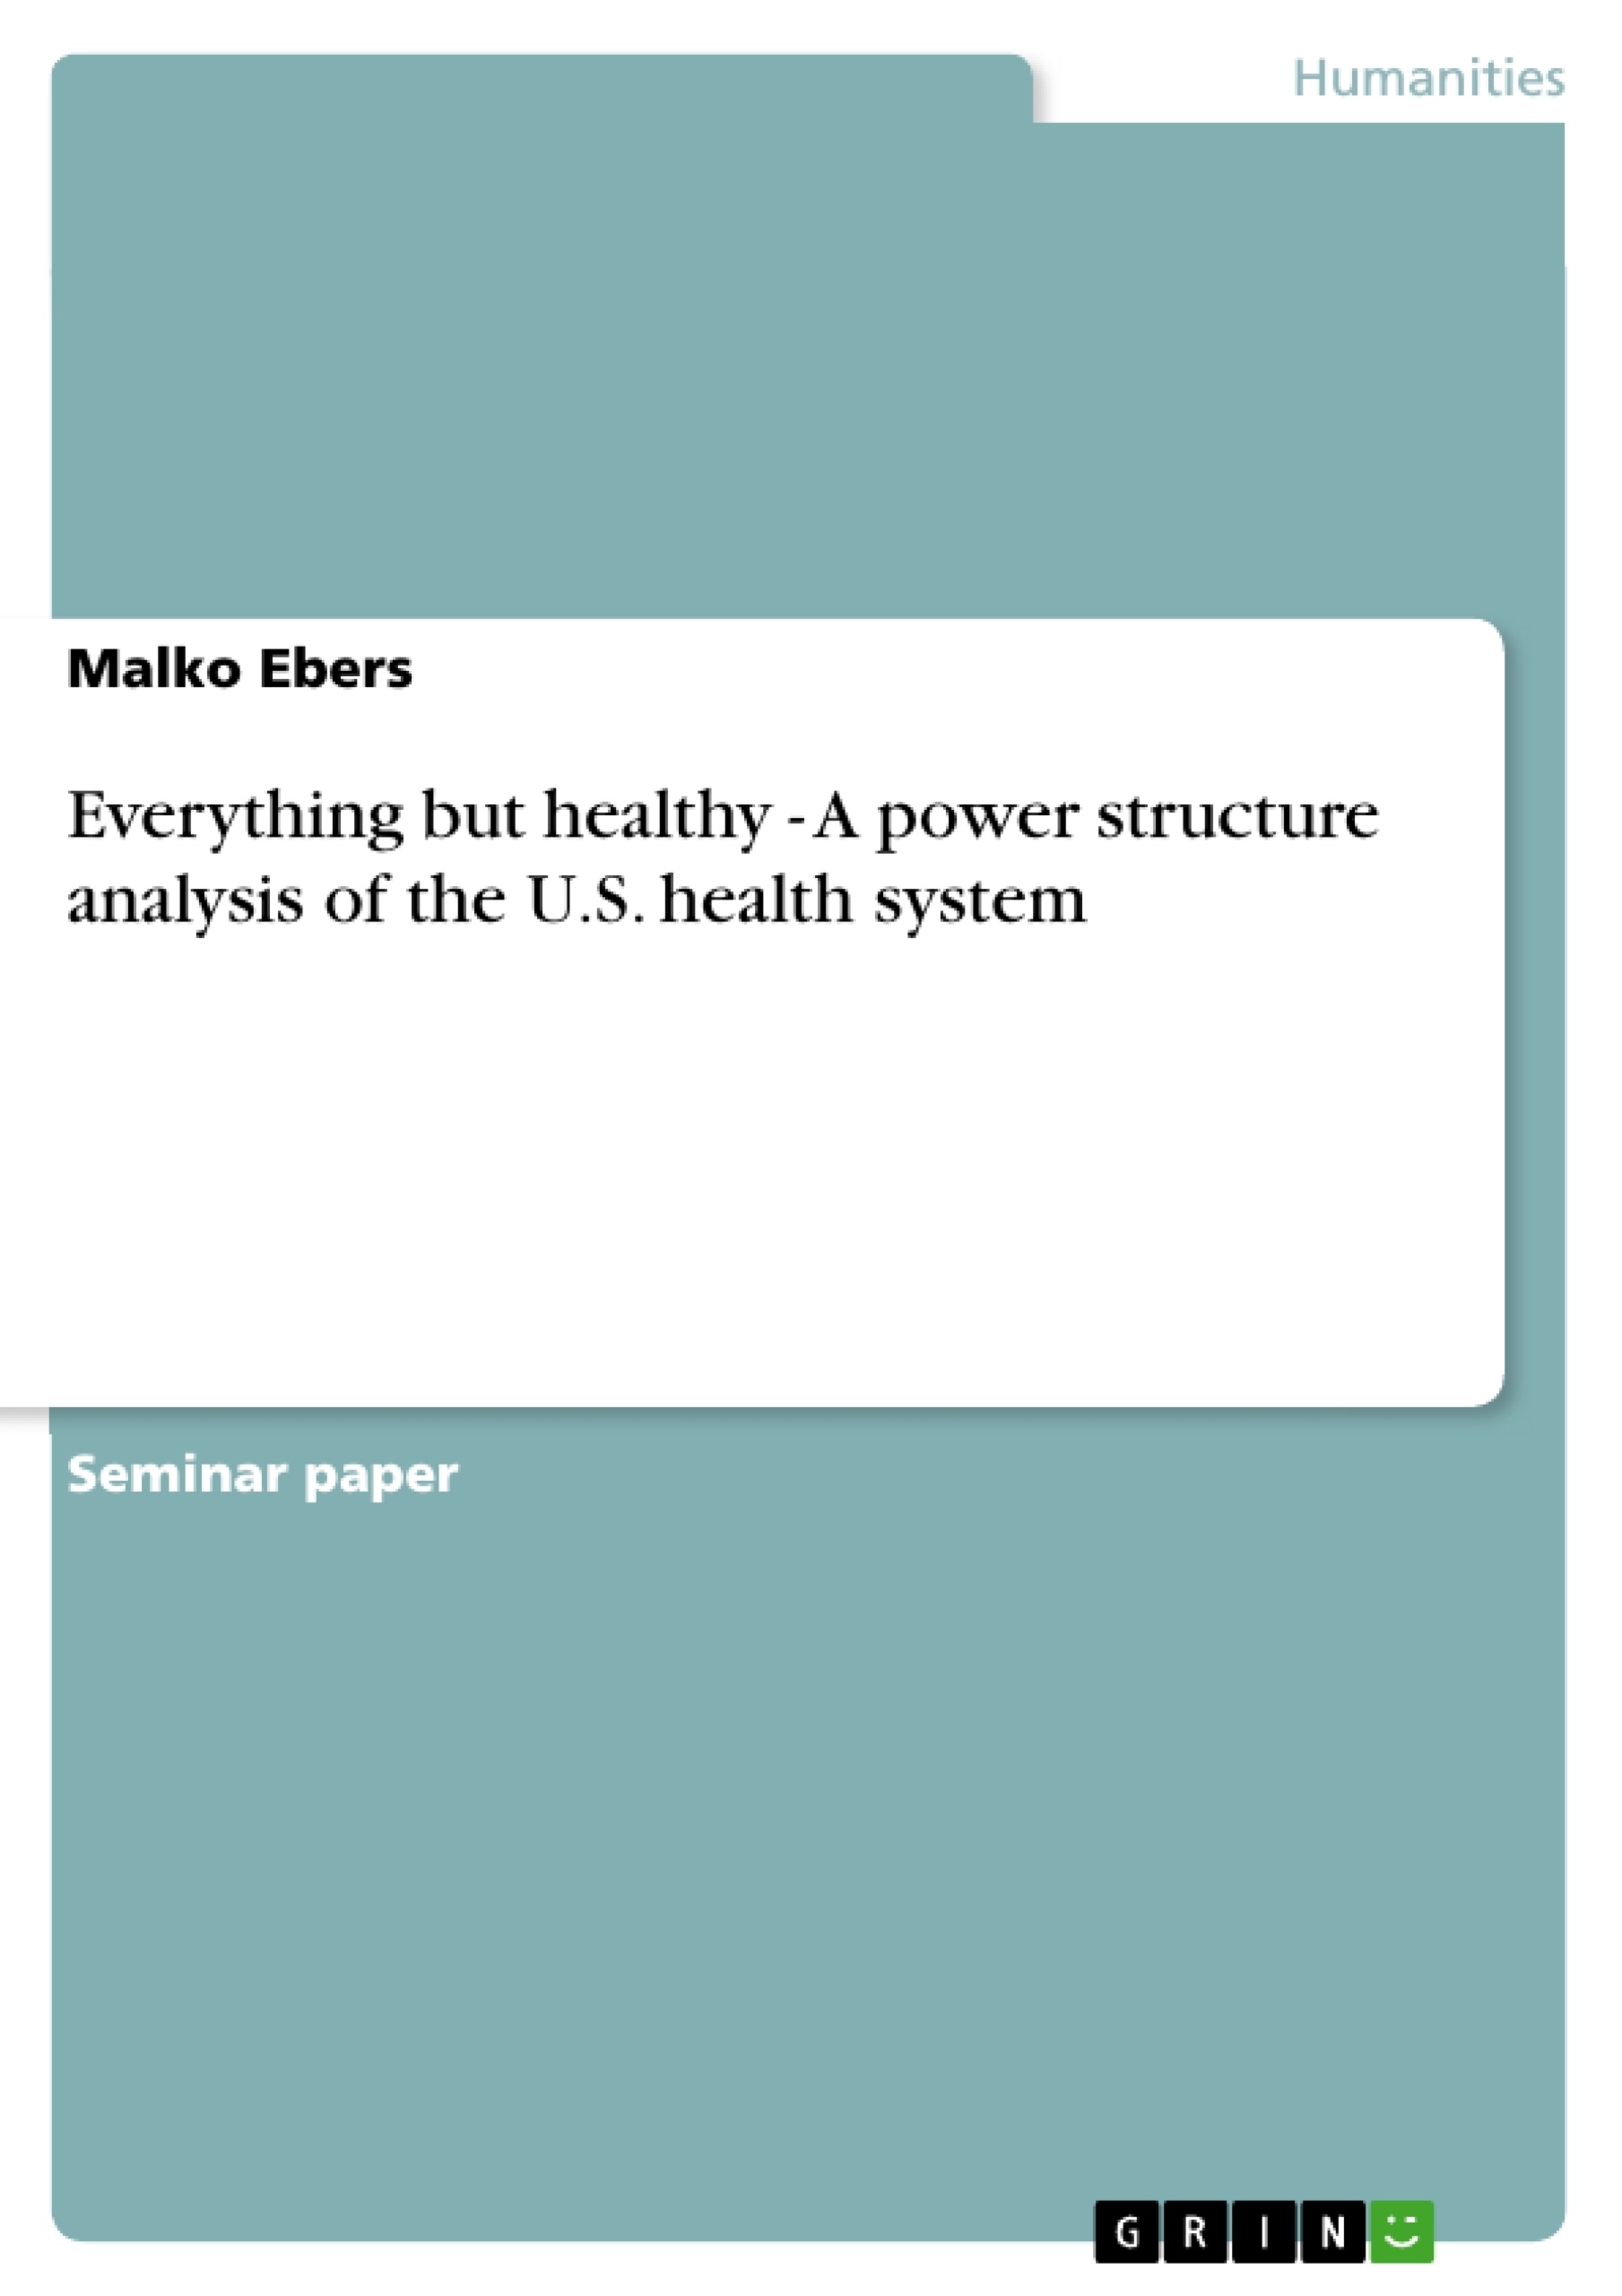 Título: Everything but healthy - A power structure analysis of the U.S. health system